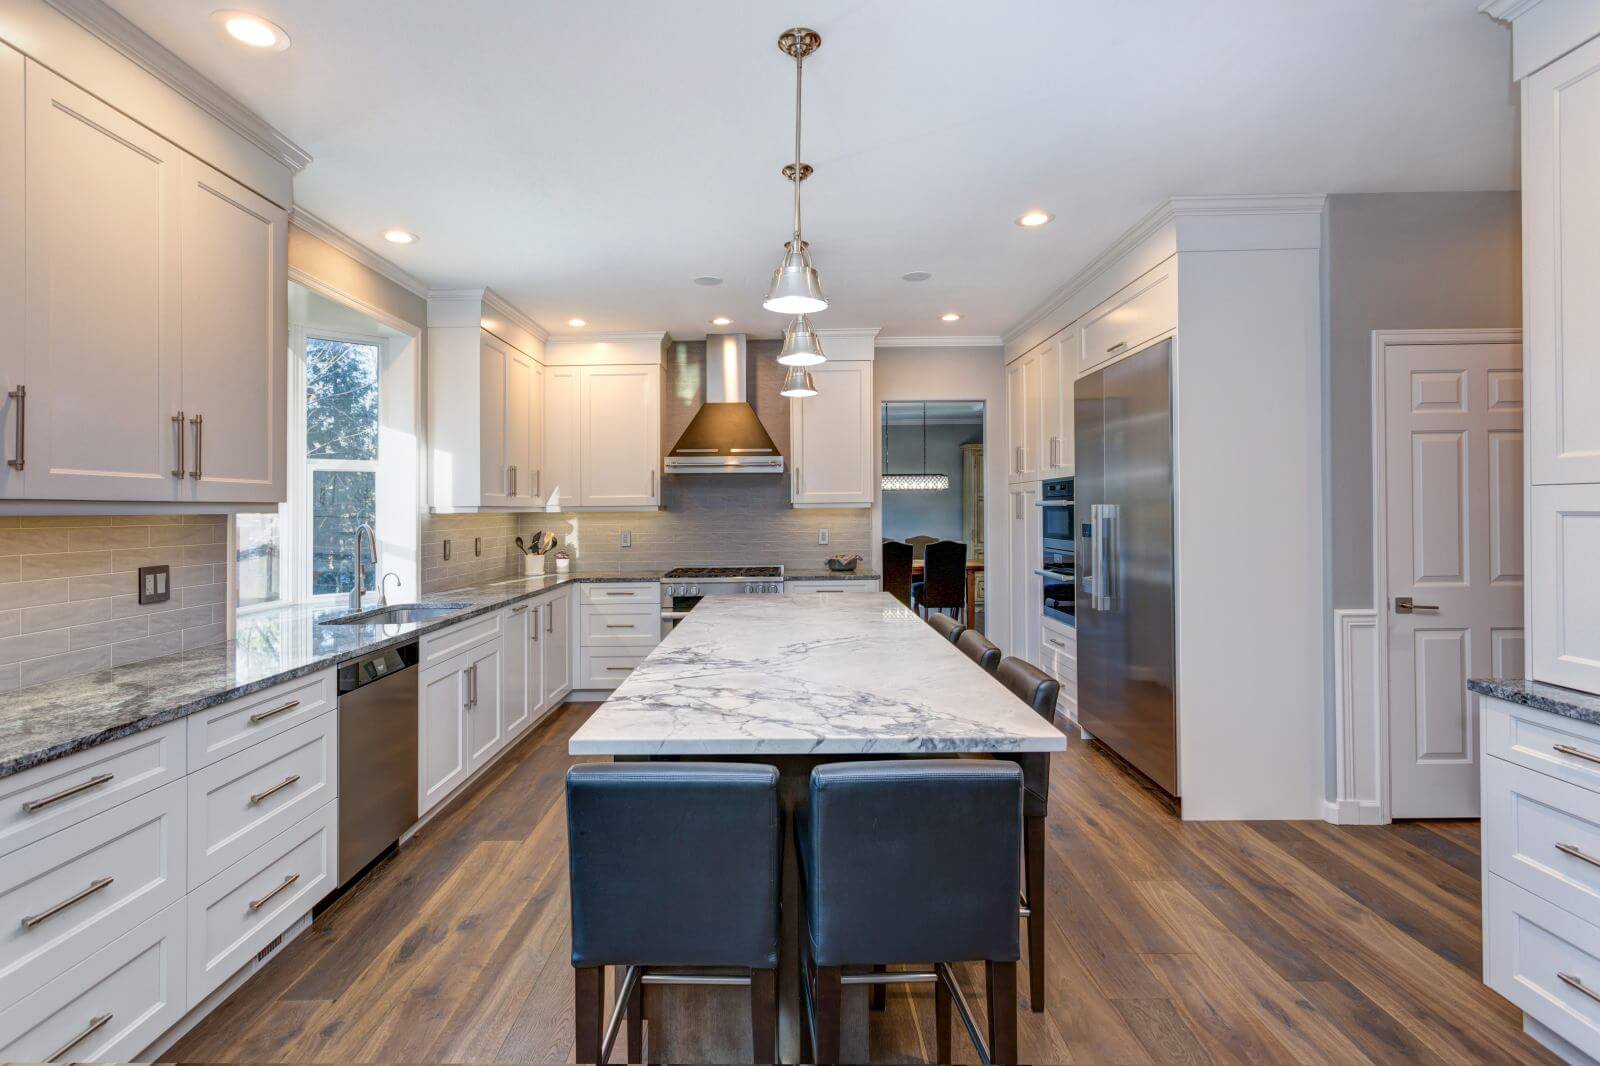 Luxury home interior boasts Beautiful black and white kitchen with custom white shaker cabinets, endless marble topped kitchen island with black leather stools over wide planked hardwood floor.